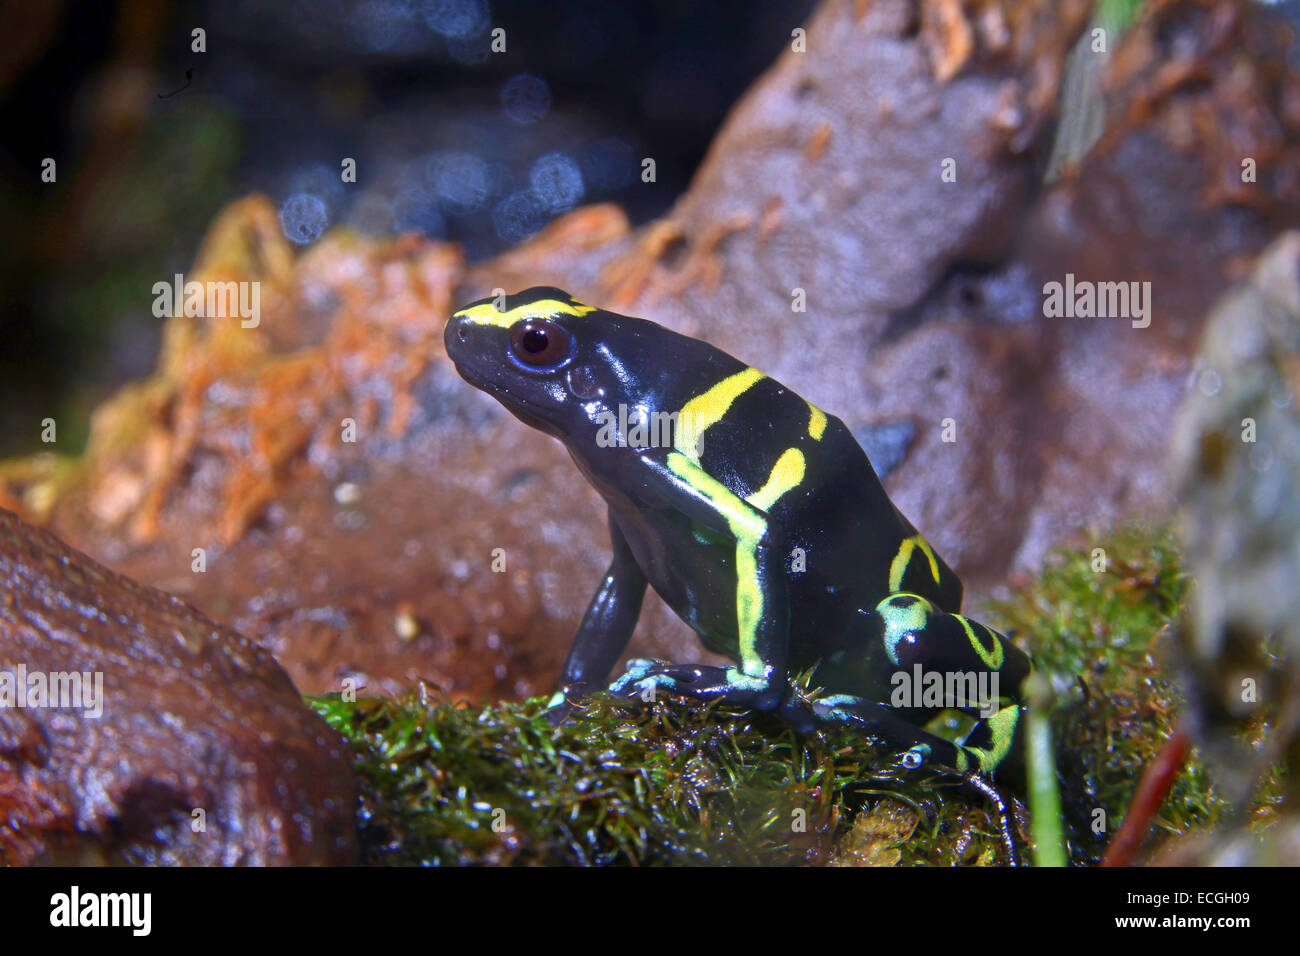 Yellow-banded poison dart frog (Dendrobates leucomelas) with aposematic coloration Stock Photo